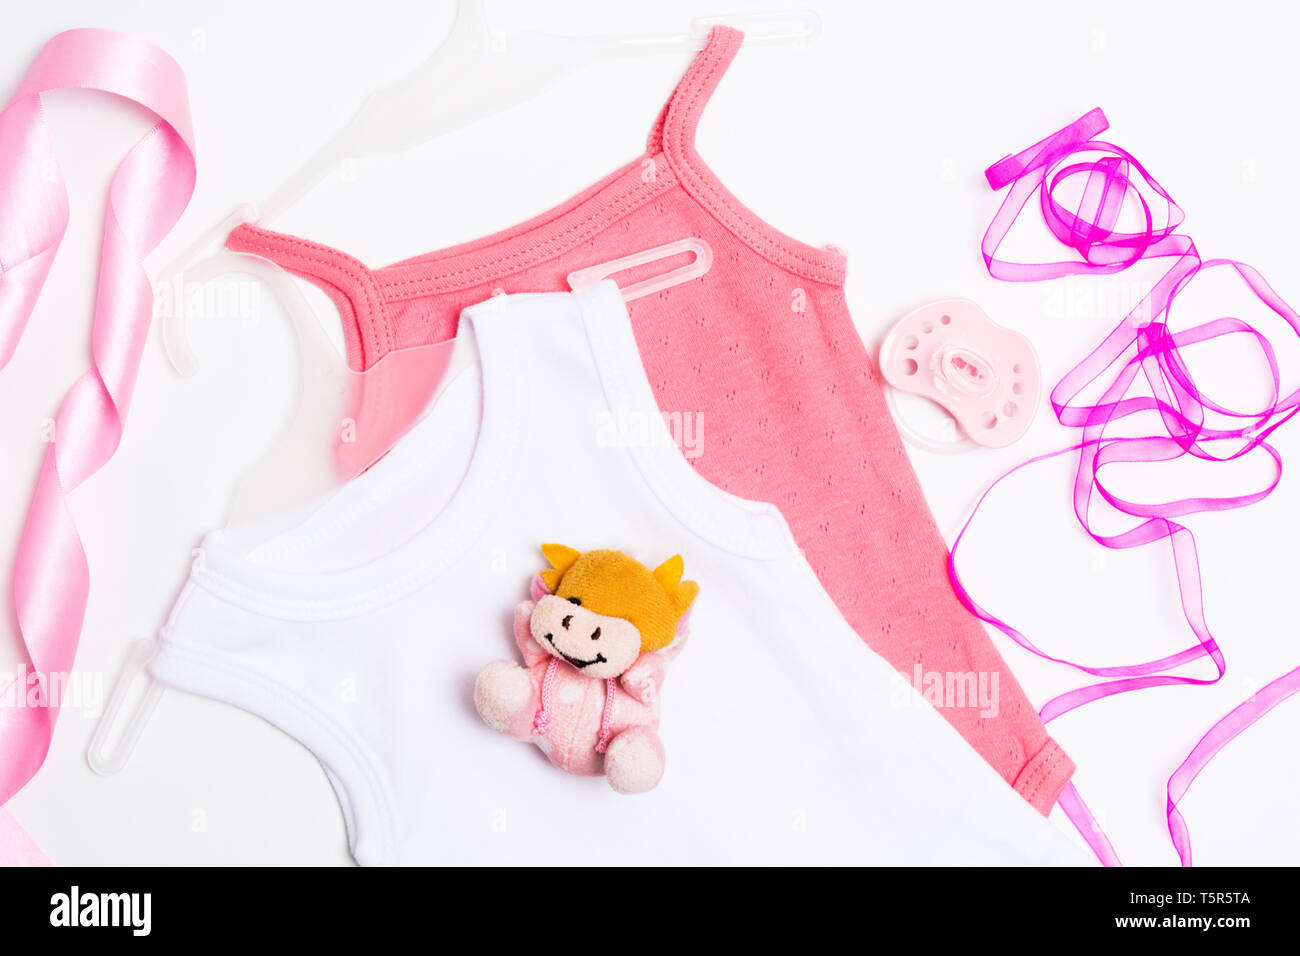 Two pink and whie babysuits with toy, pacifier and ribbons. Baby shower decoration on whie background. Flat lay style. Newborn girl clothes. Top view Stock Photo